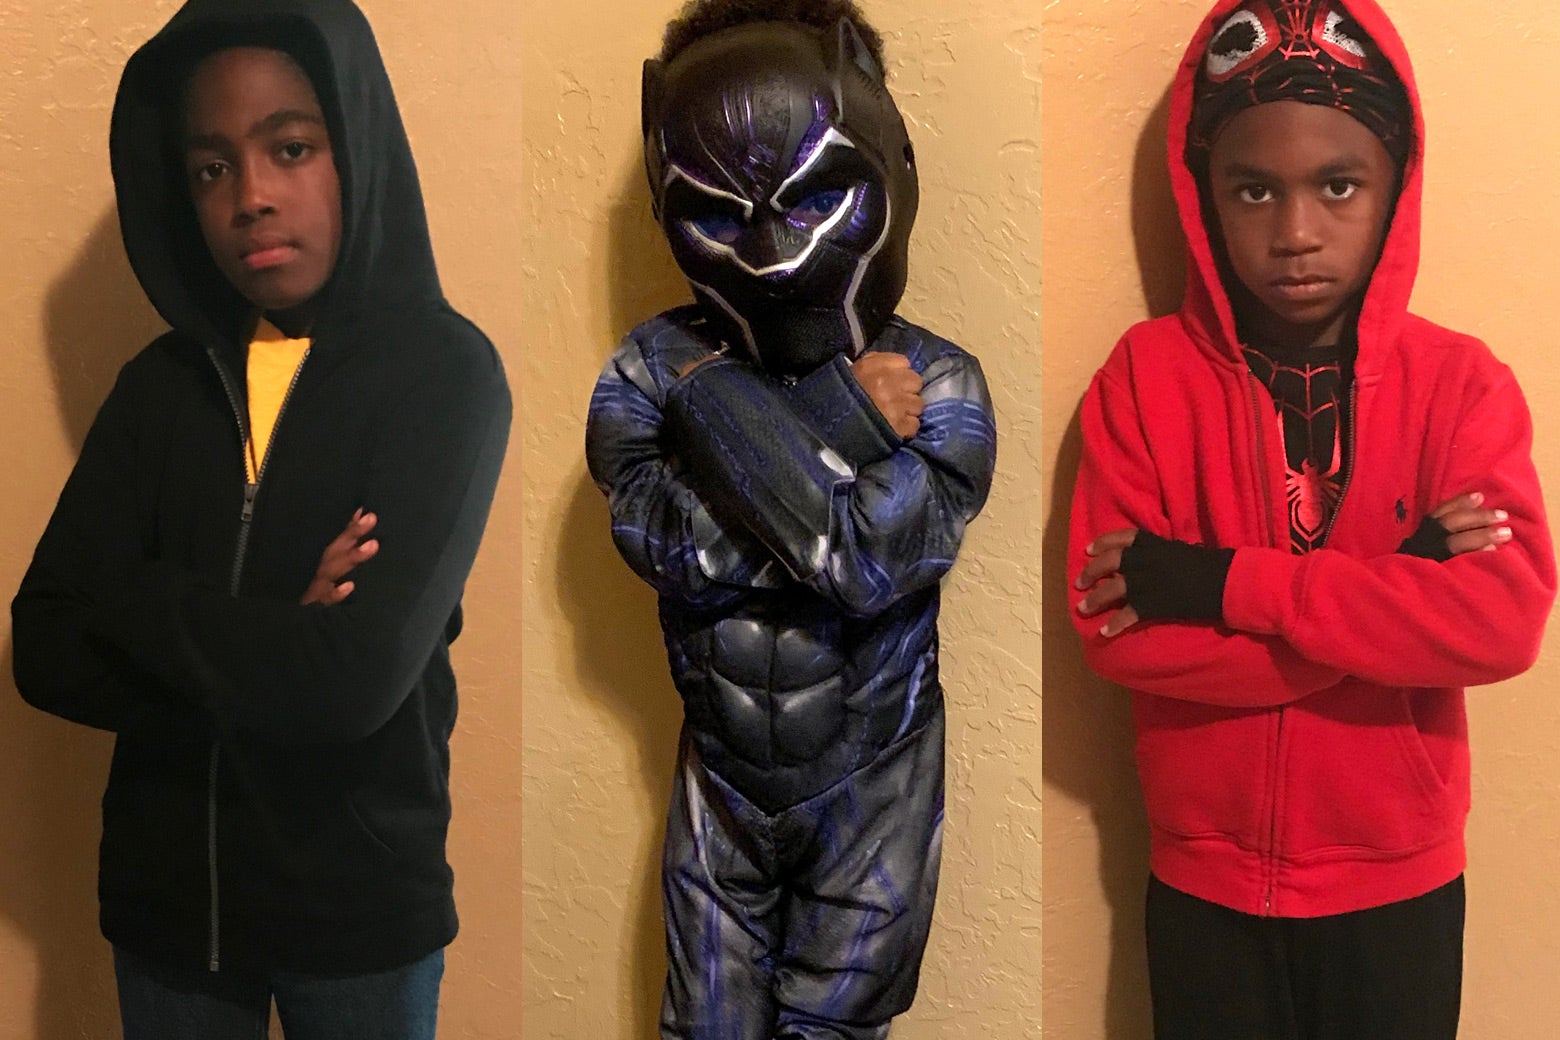 Lawrence Ware's children dressed as Luke Cage, Black Panther, and Miles Morales.